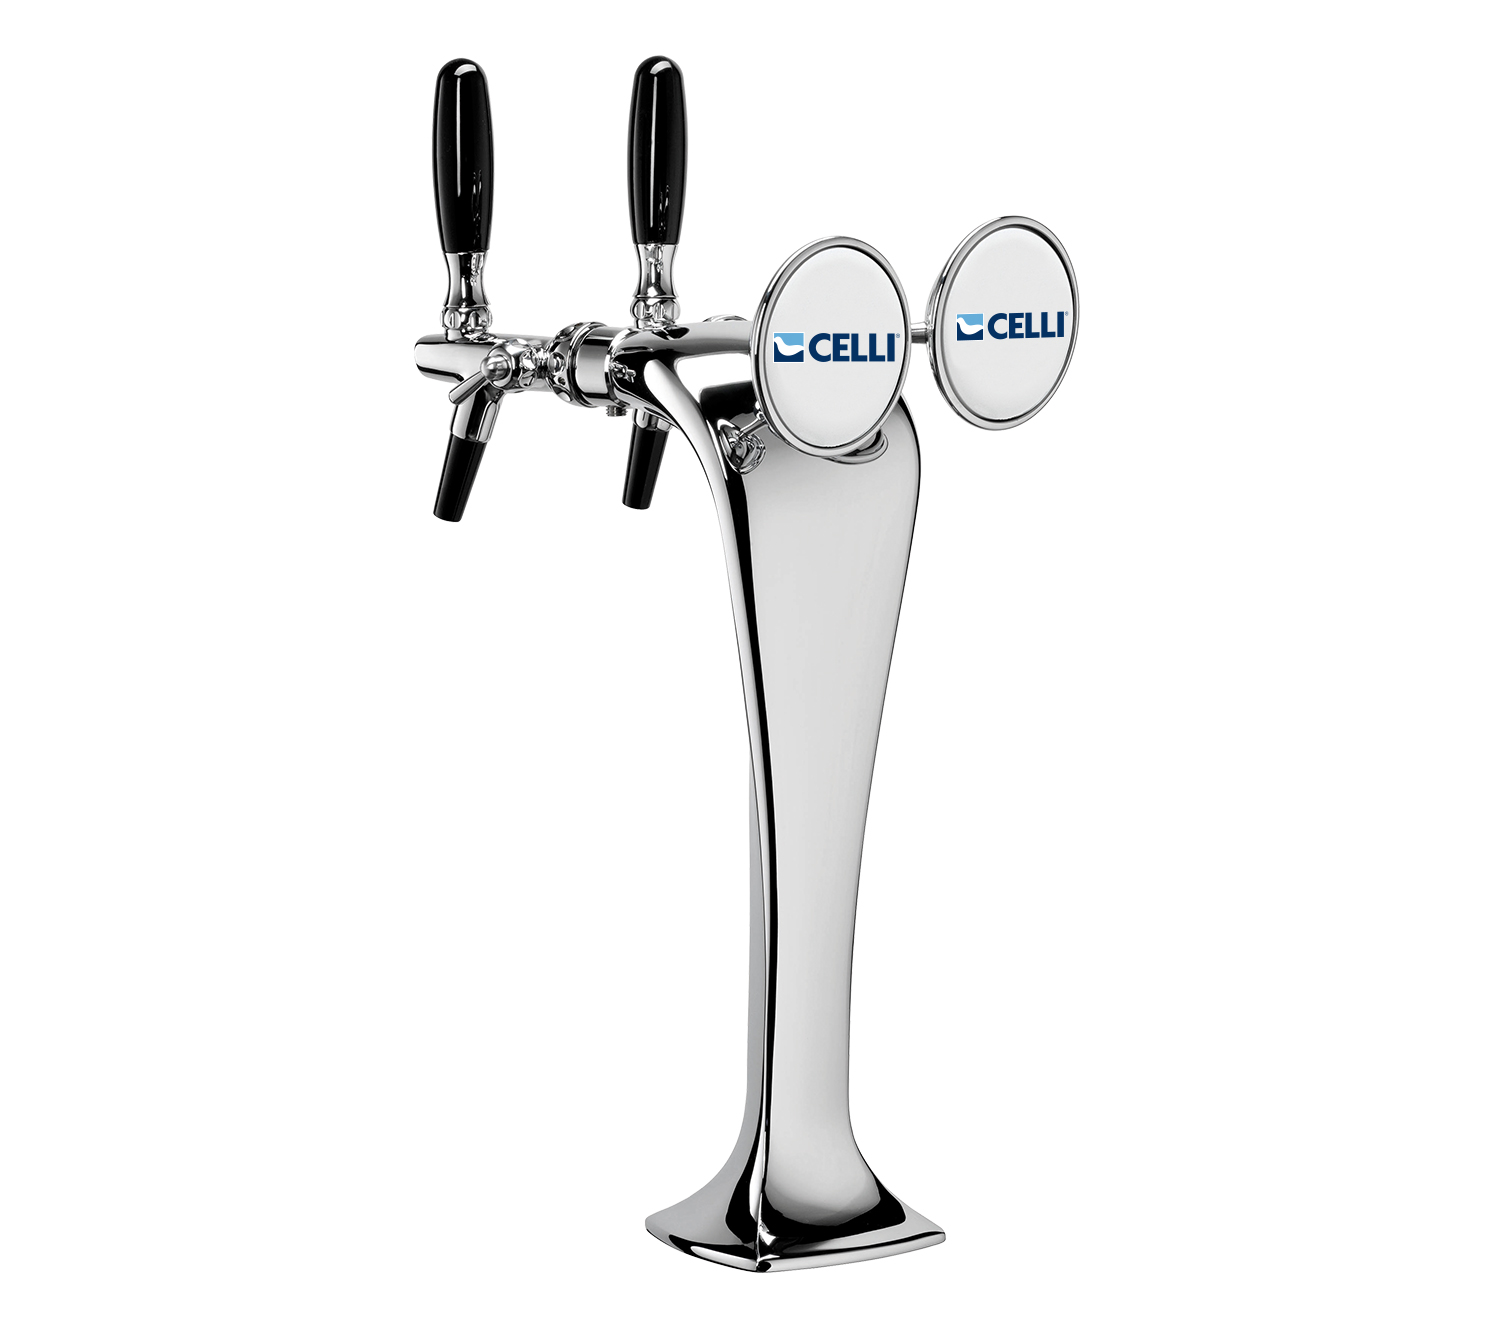 CELLI Cobra Plus 2 - Two-way beer tower